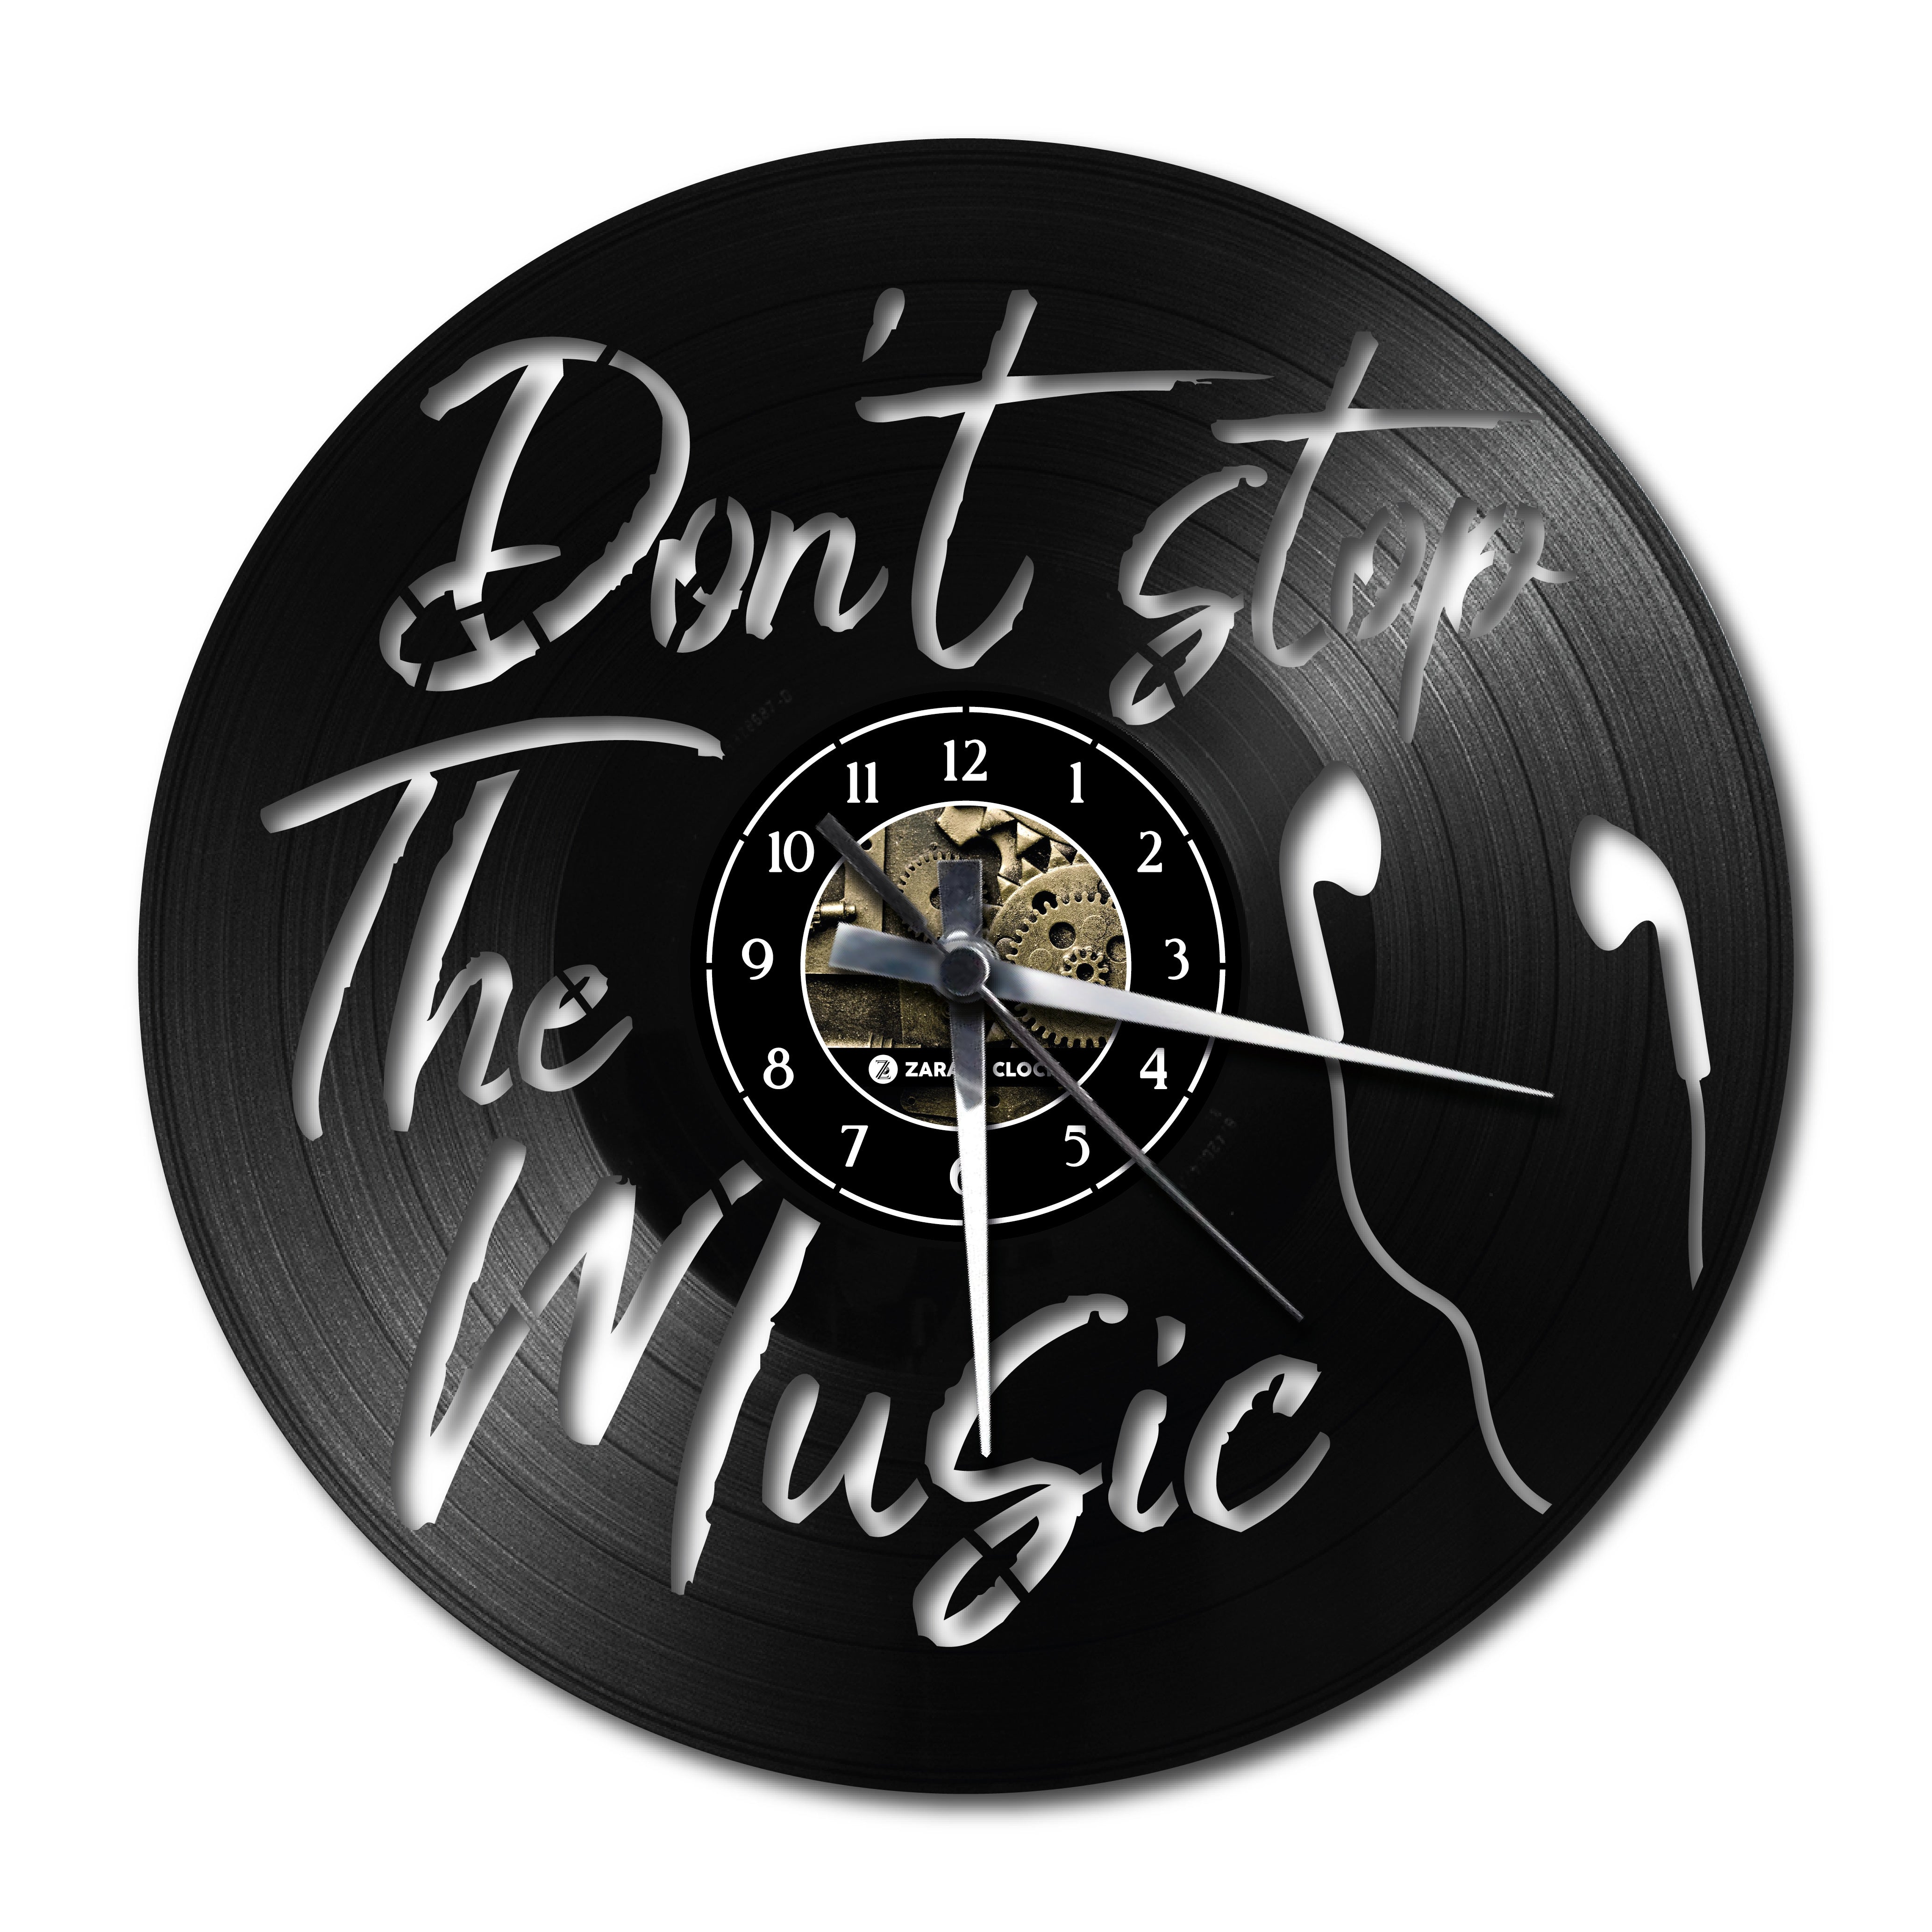 DON'T STOP THE MUSIC ✦ orologio in vinile